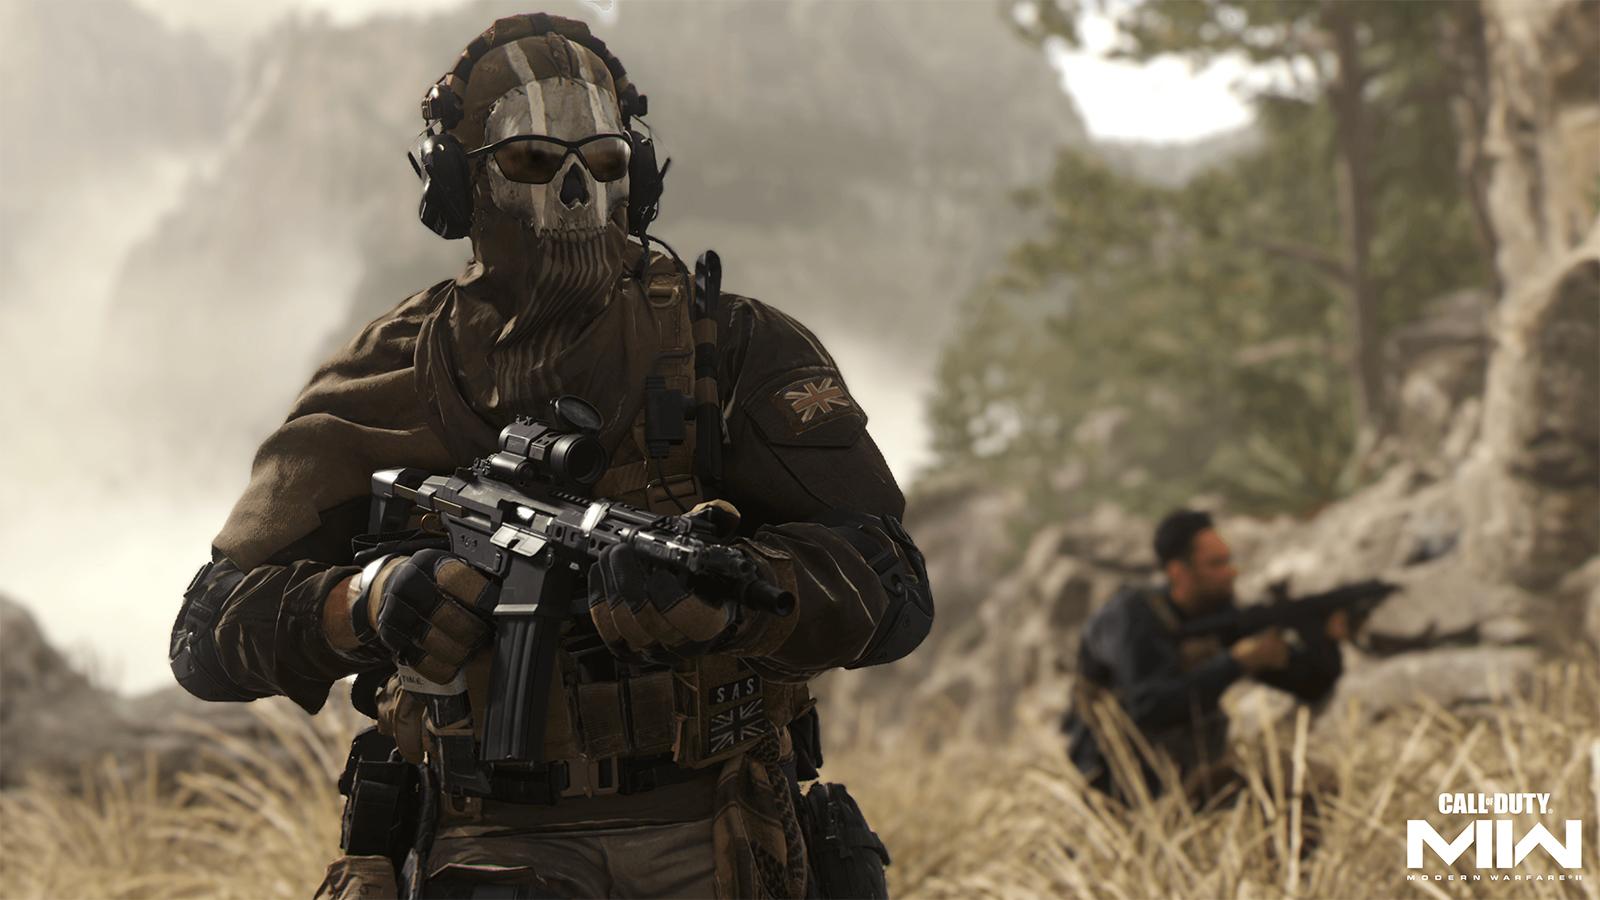 Modern Warfare 2 players furious that Ghost Perk doesn't actually